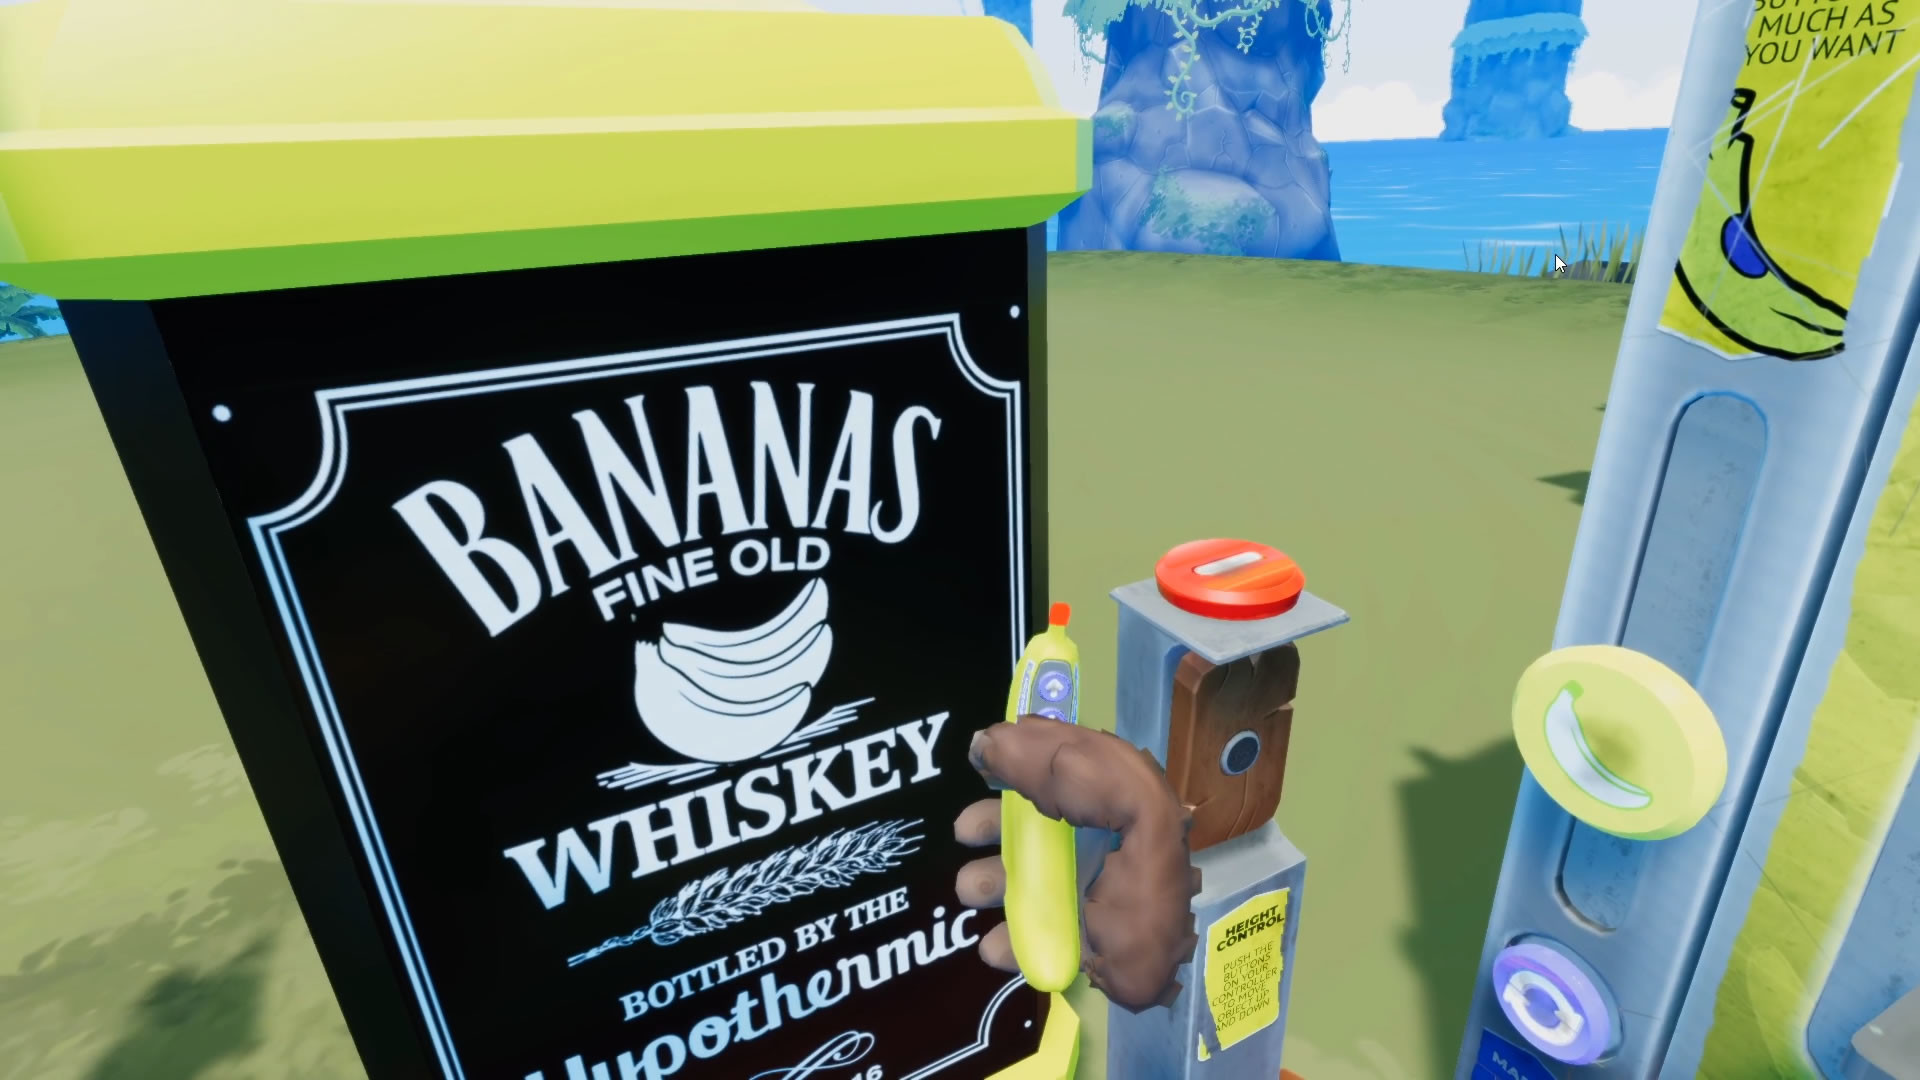 Banana For Scale review: a meme turned VR game